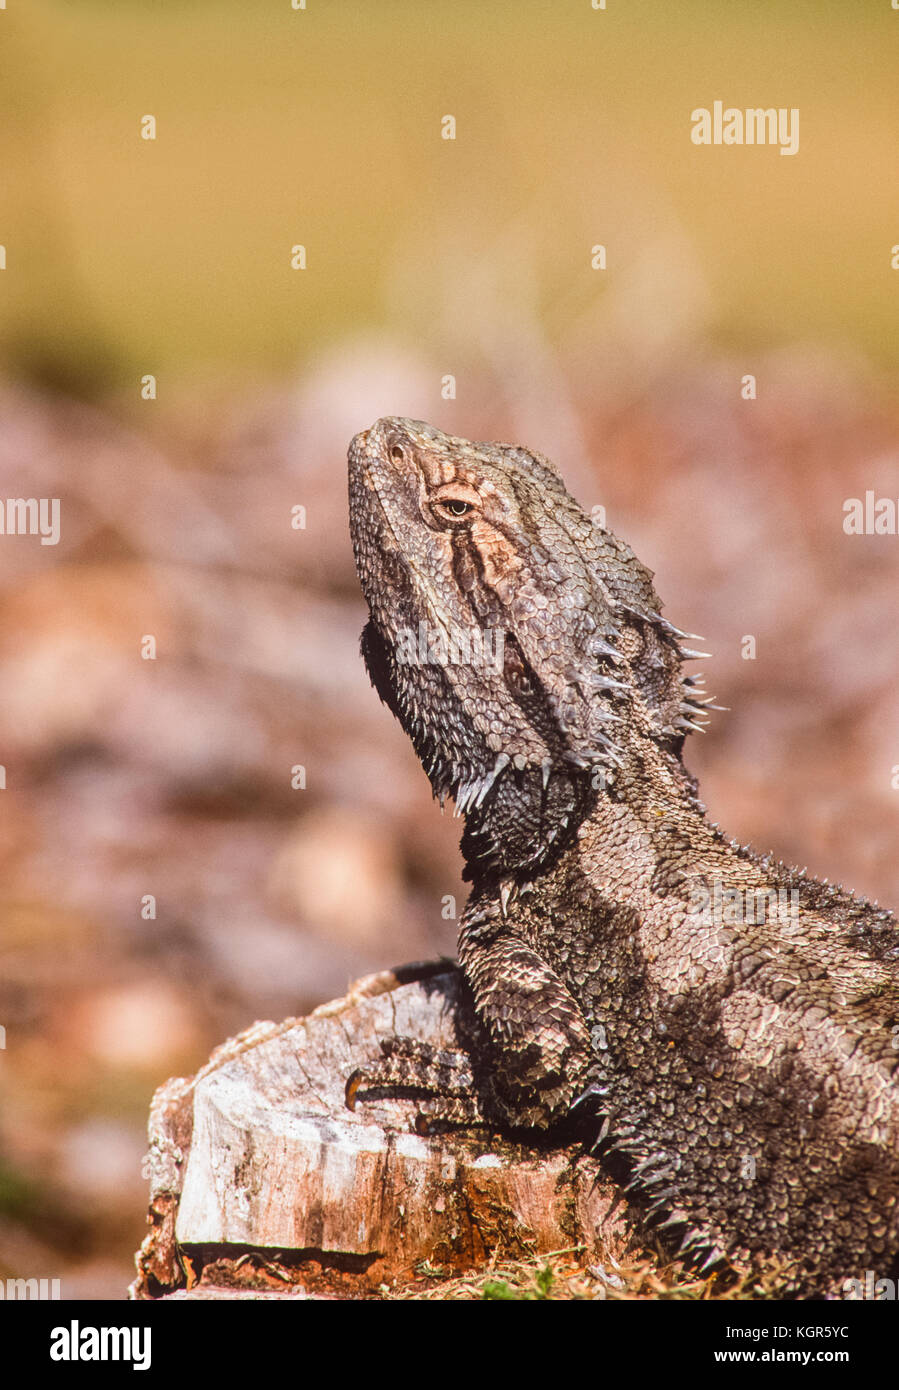 Eastern Water Dragon, Intellagama lesueurii formerly Physignathus lesueurii, New South Wales, Australia Stock Photo